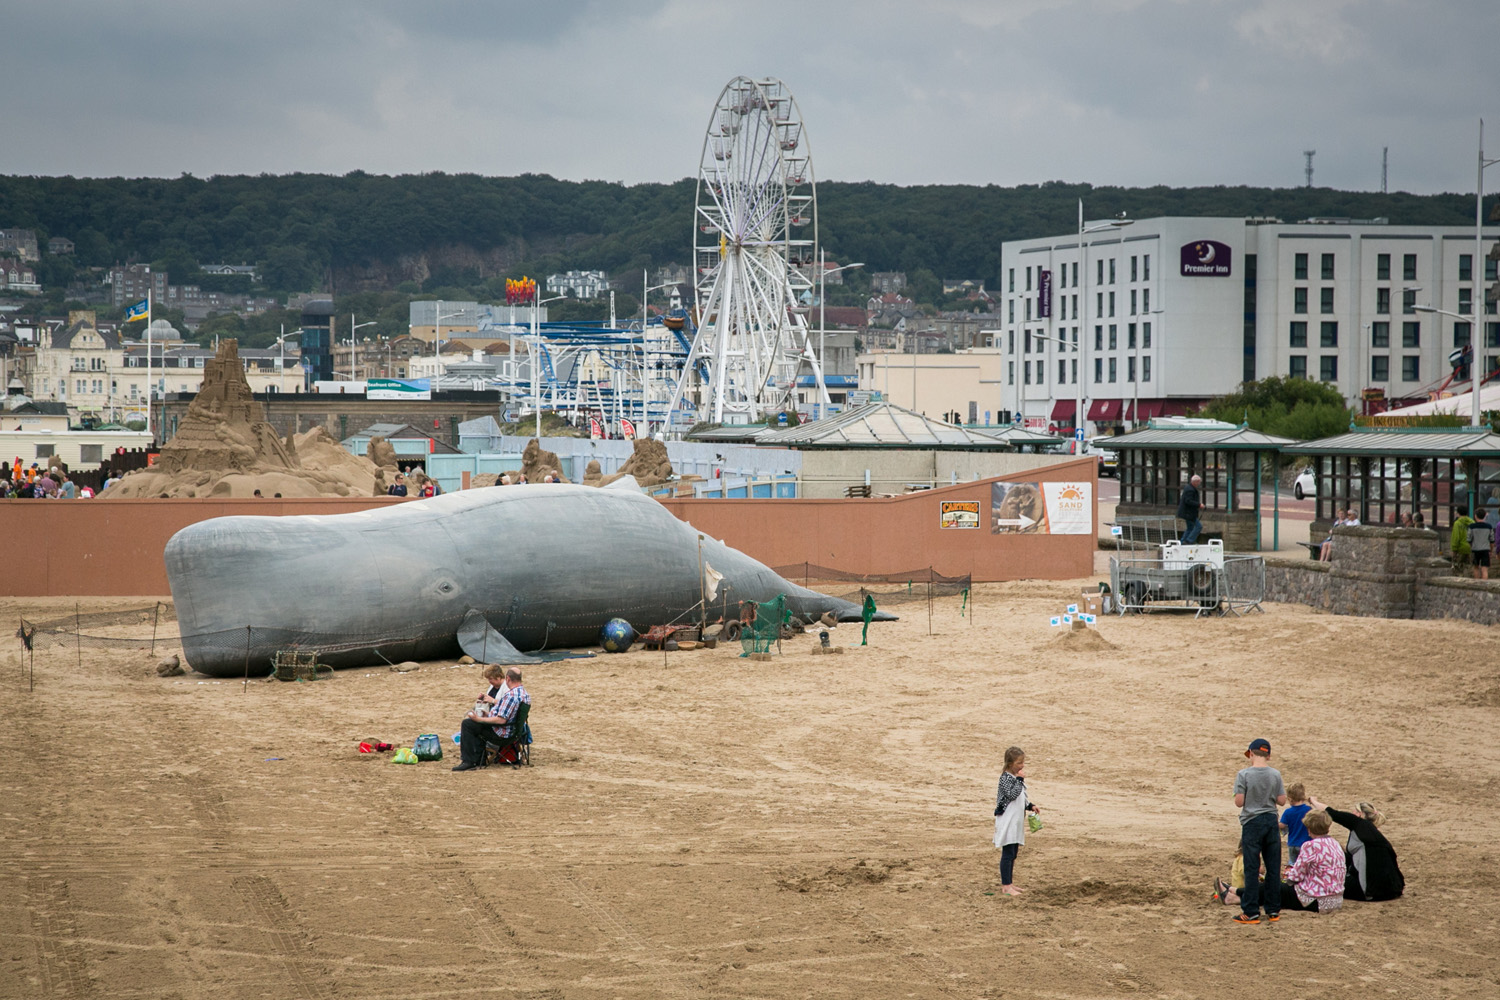 Biblical Whale Inflated On Weston-Super-Mare Beach